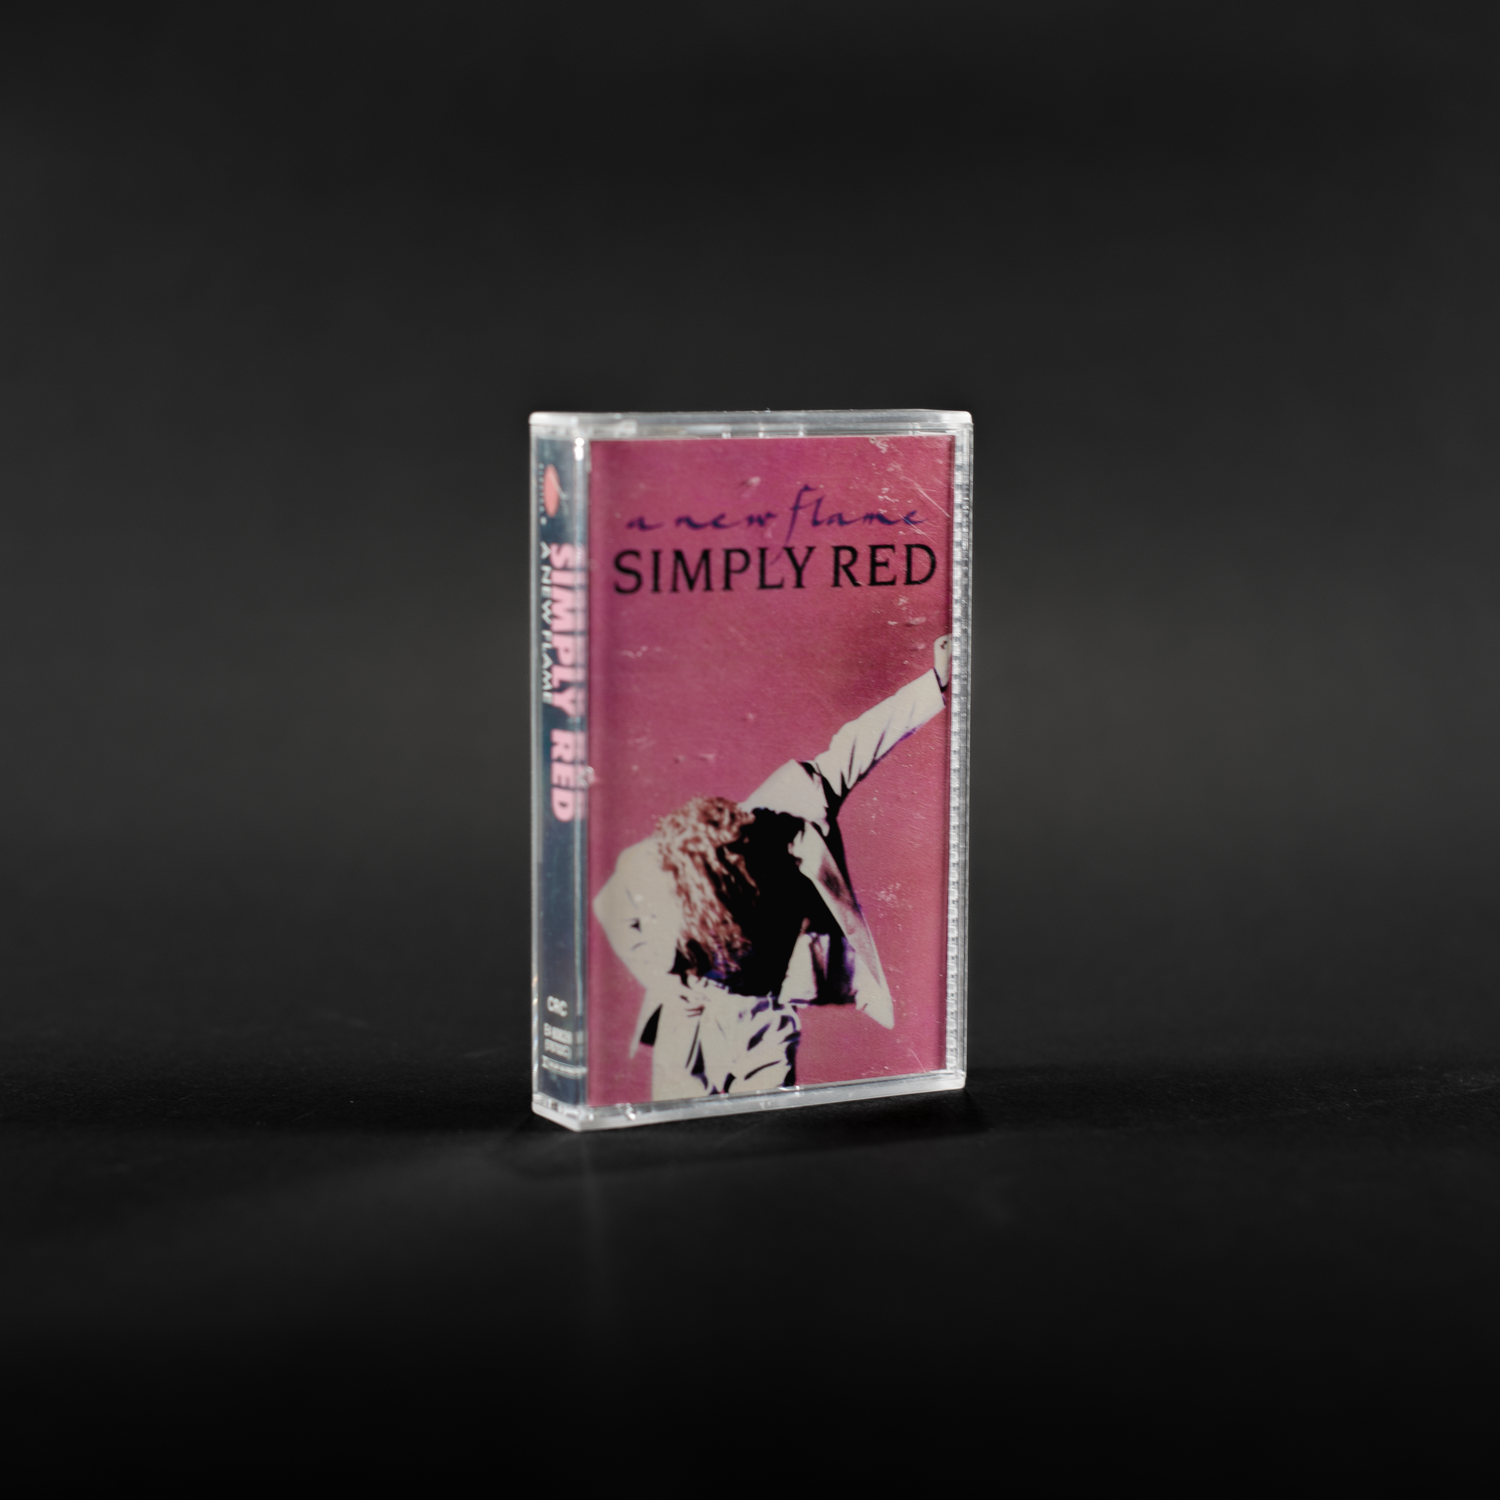 Simply Red - A New Flame (Vintage Cassette)